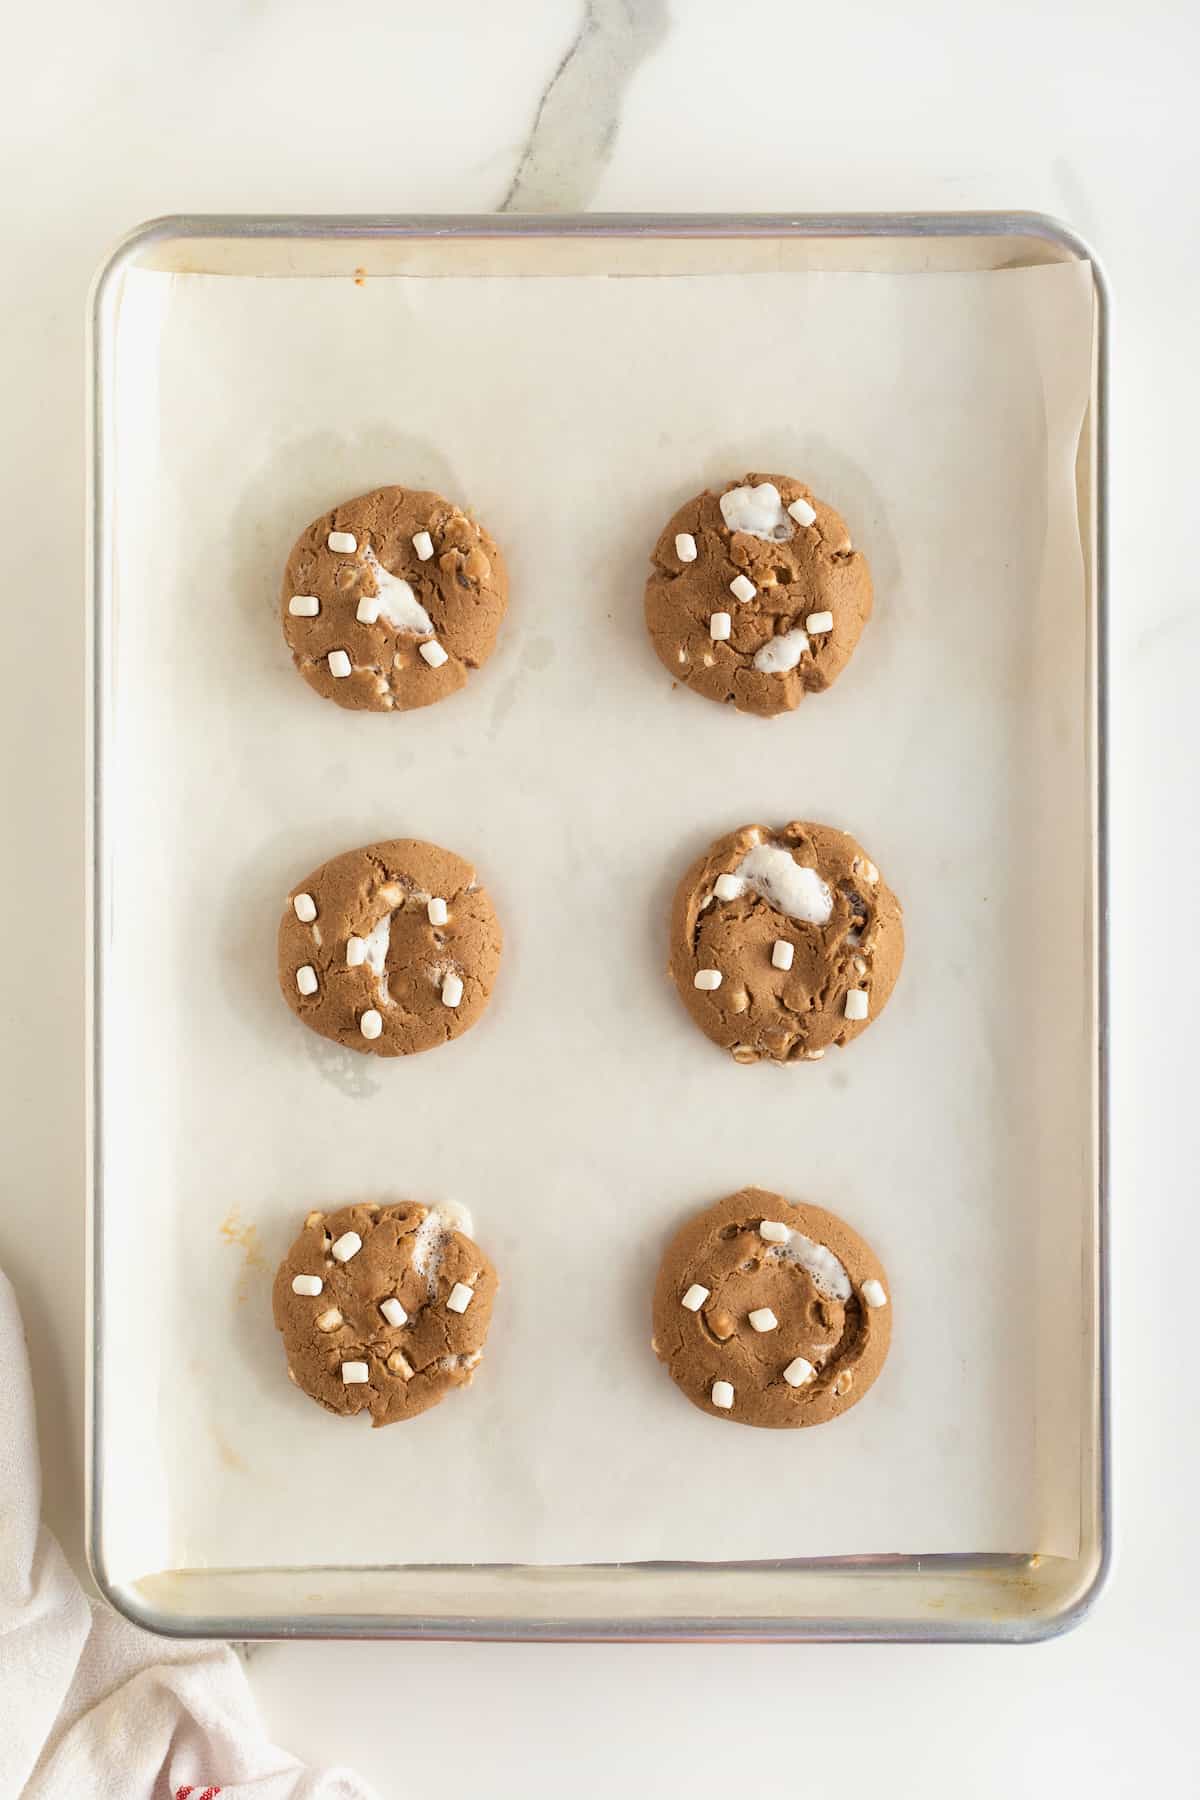 Six hot cocoa cookies on a parchment lined aluminum baking sheet.